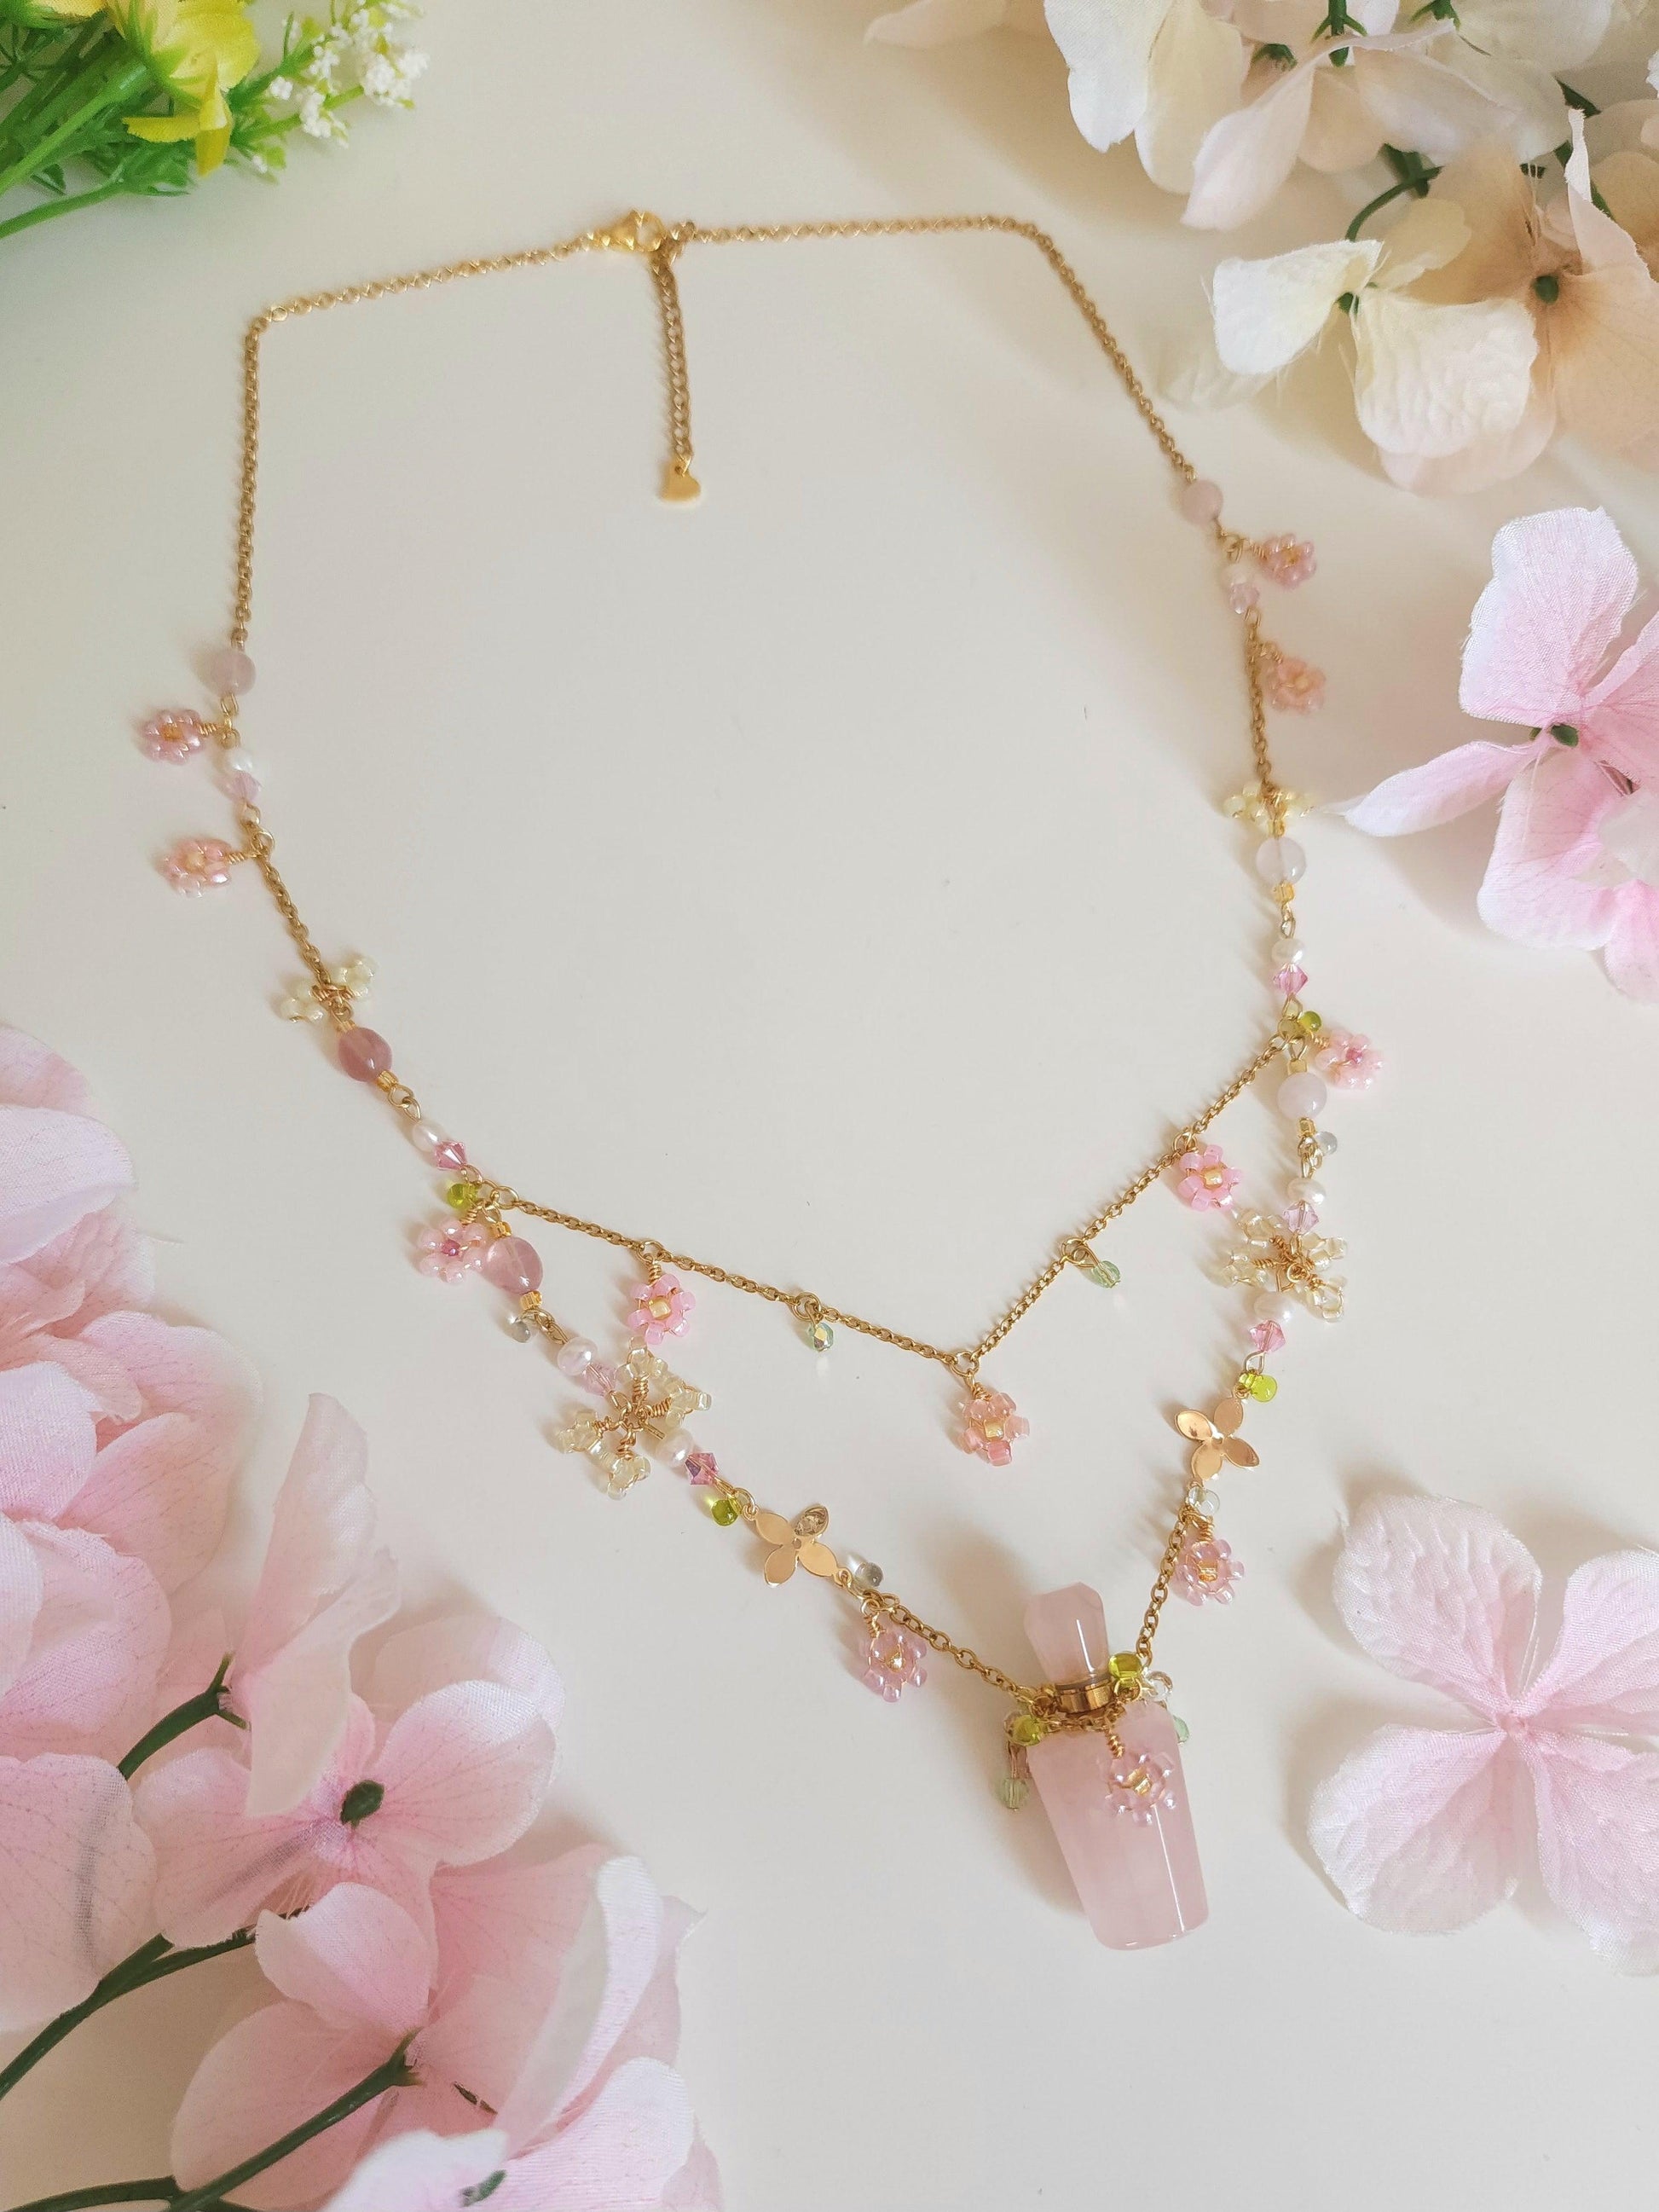 Spring Fairy's Favourite Perfume Bottle Necklace - By Cocoyu